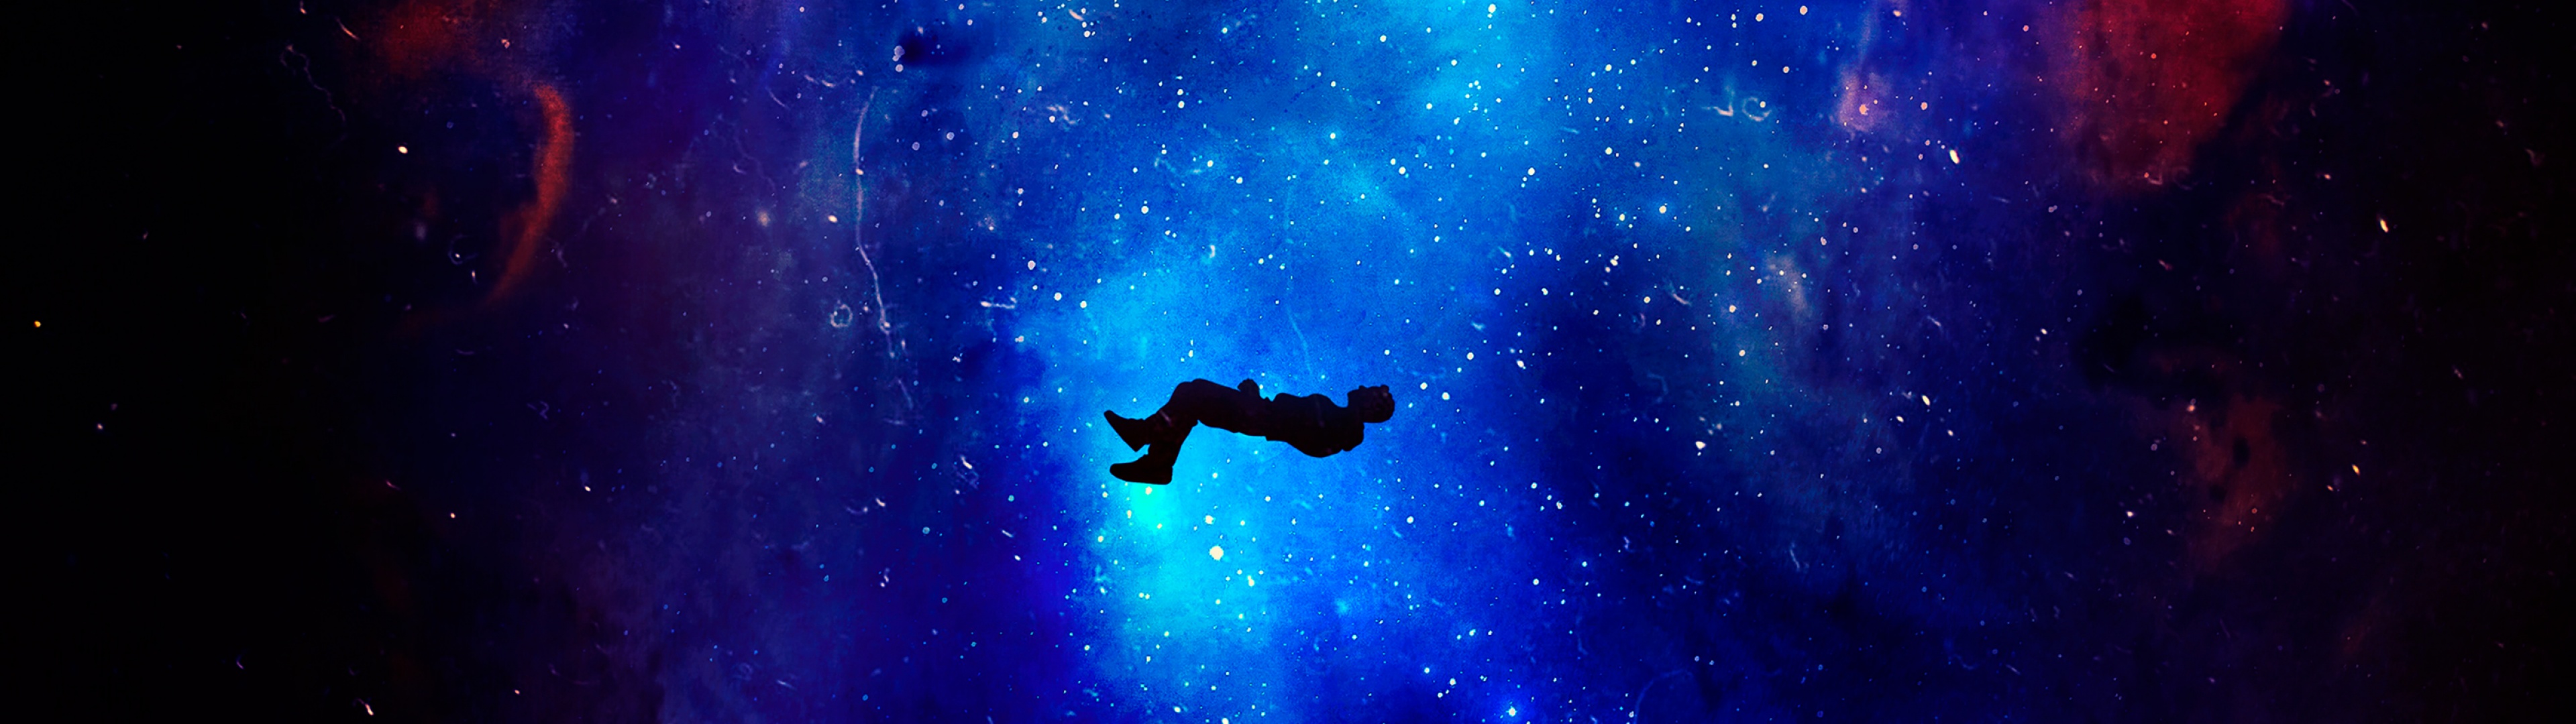 Lost in Space Wallpapers 4K, Alone, Dream, Deep space, Nebula, Fantasy,